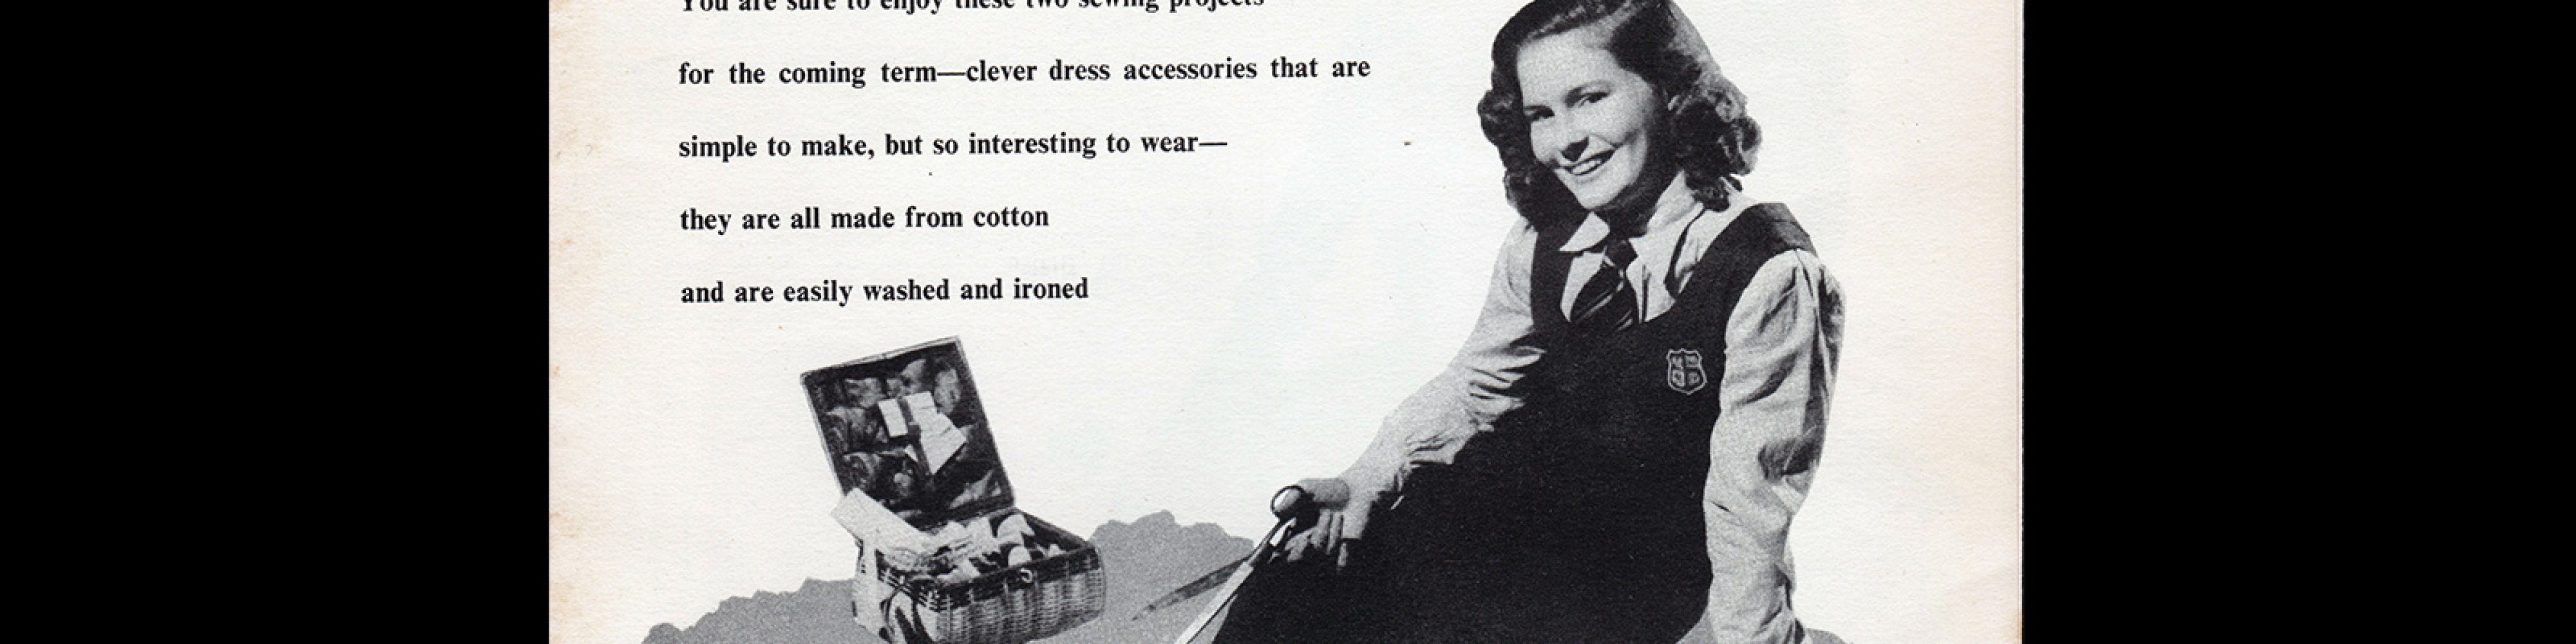 And So To Sew Bulletin 2a, 1950s